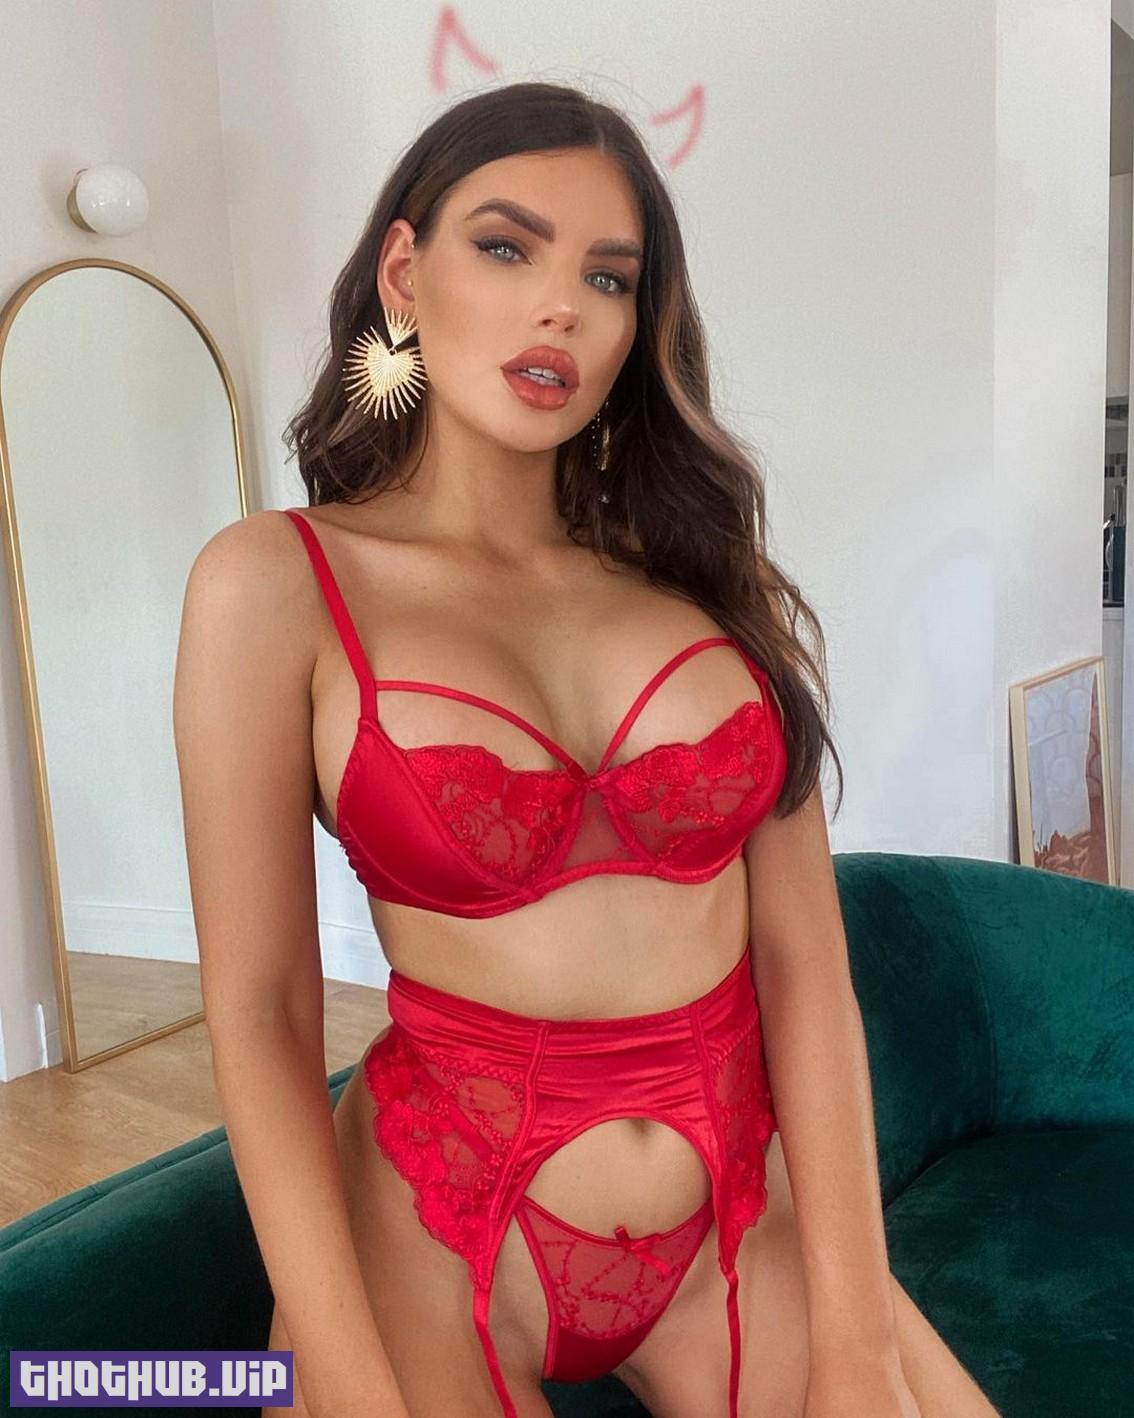 Nicole Thorne Red Lingerie And Red Dress At Christmas